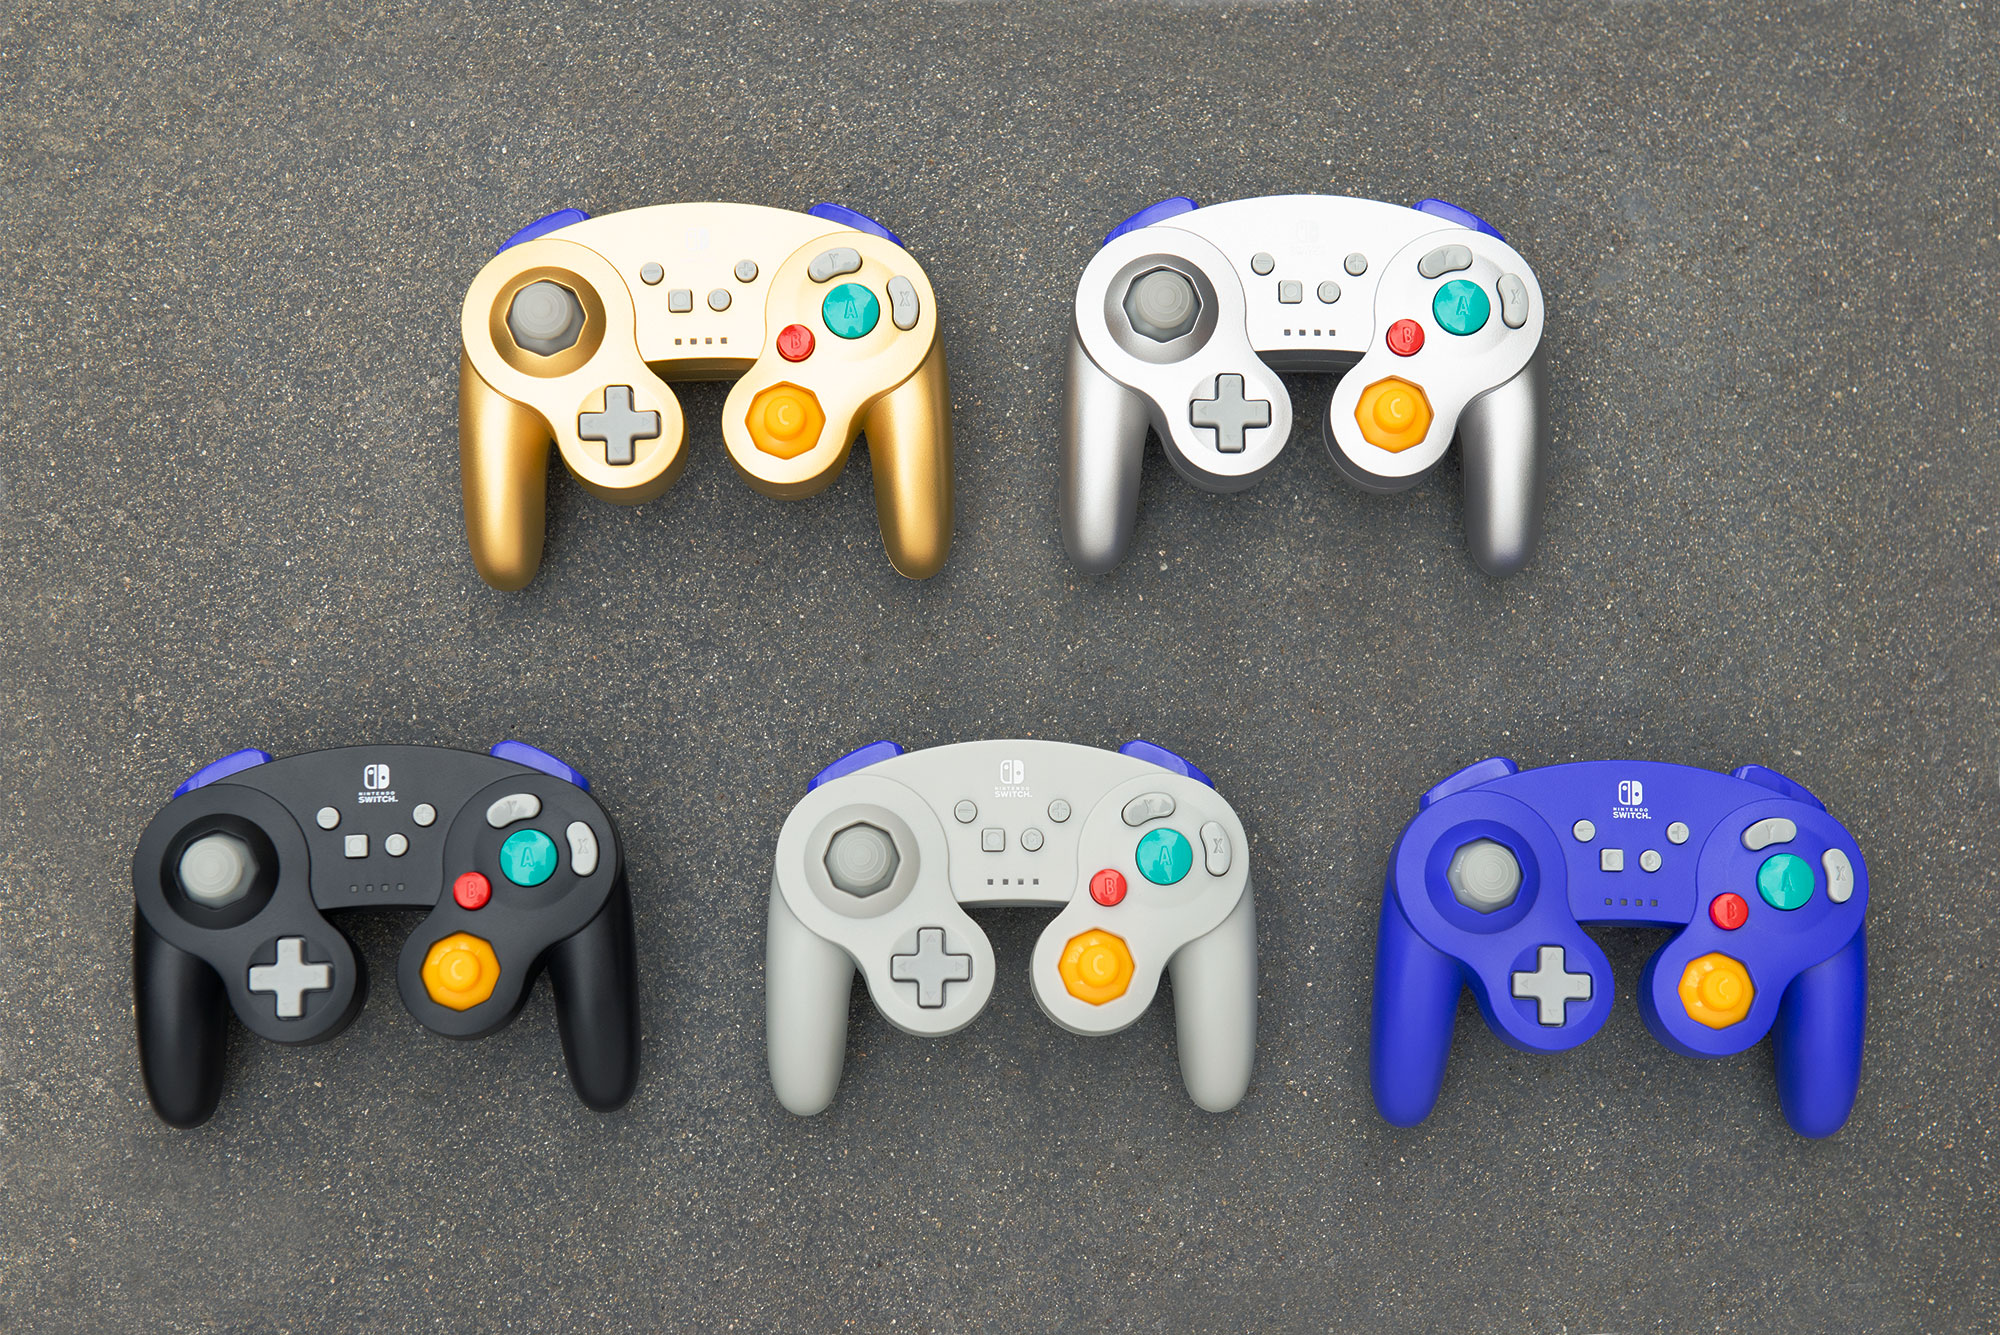 GameCube-style Wireless Controllers for Nintendo Switch Key